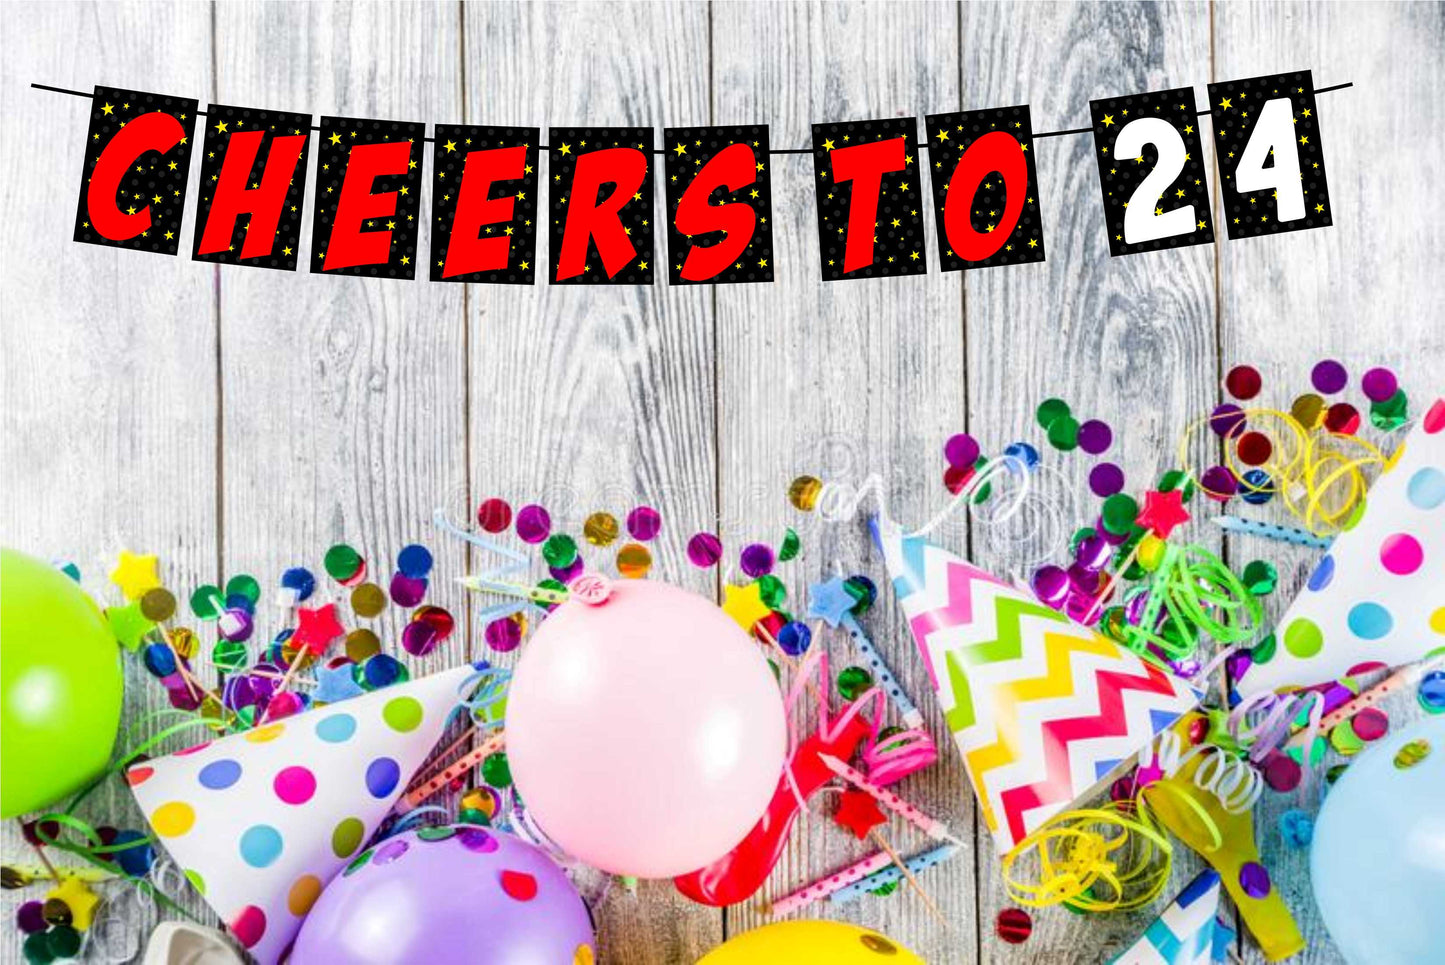 Cheers to 24 Birthday Banner for Photo Shoot Backdrop and Theme Party